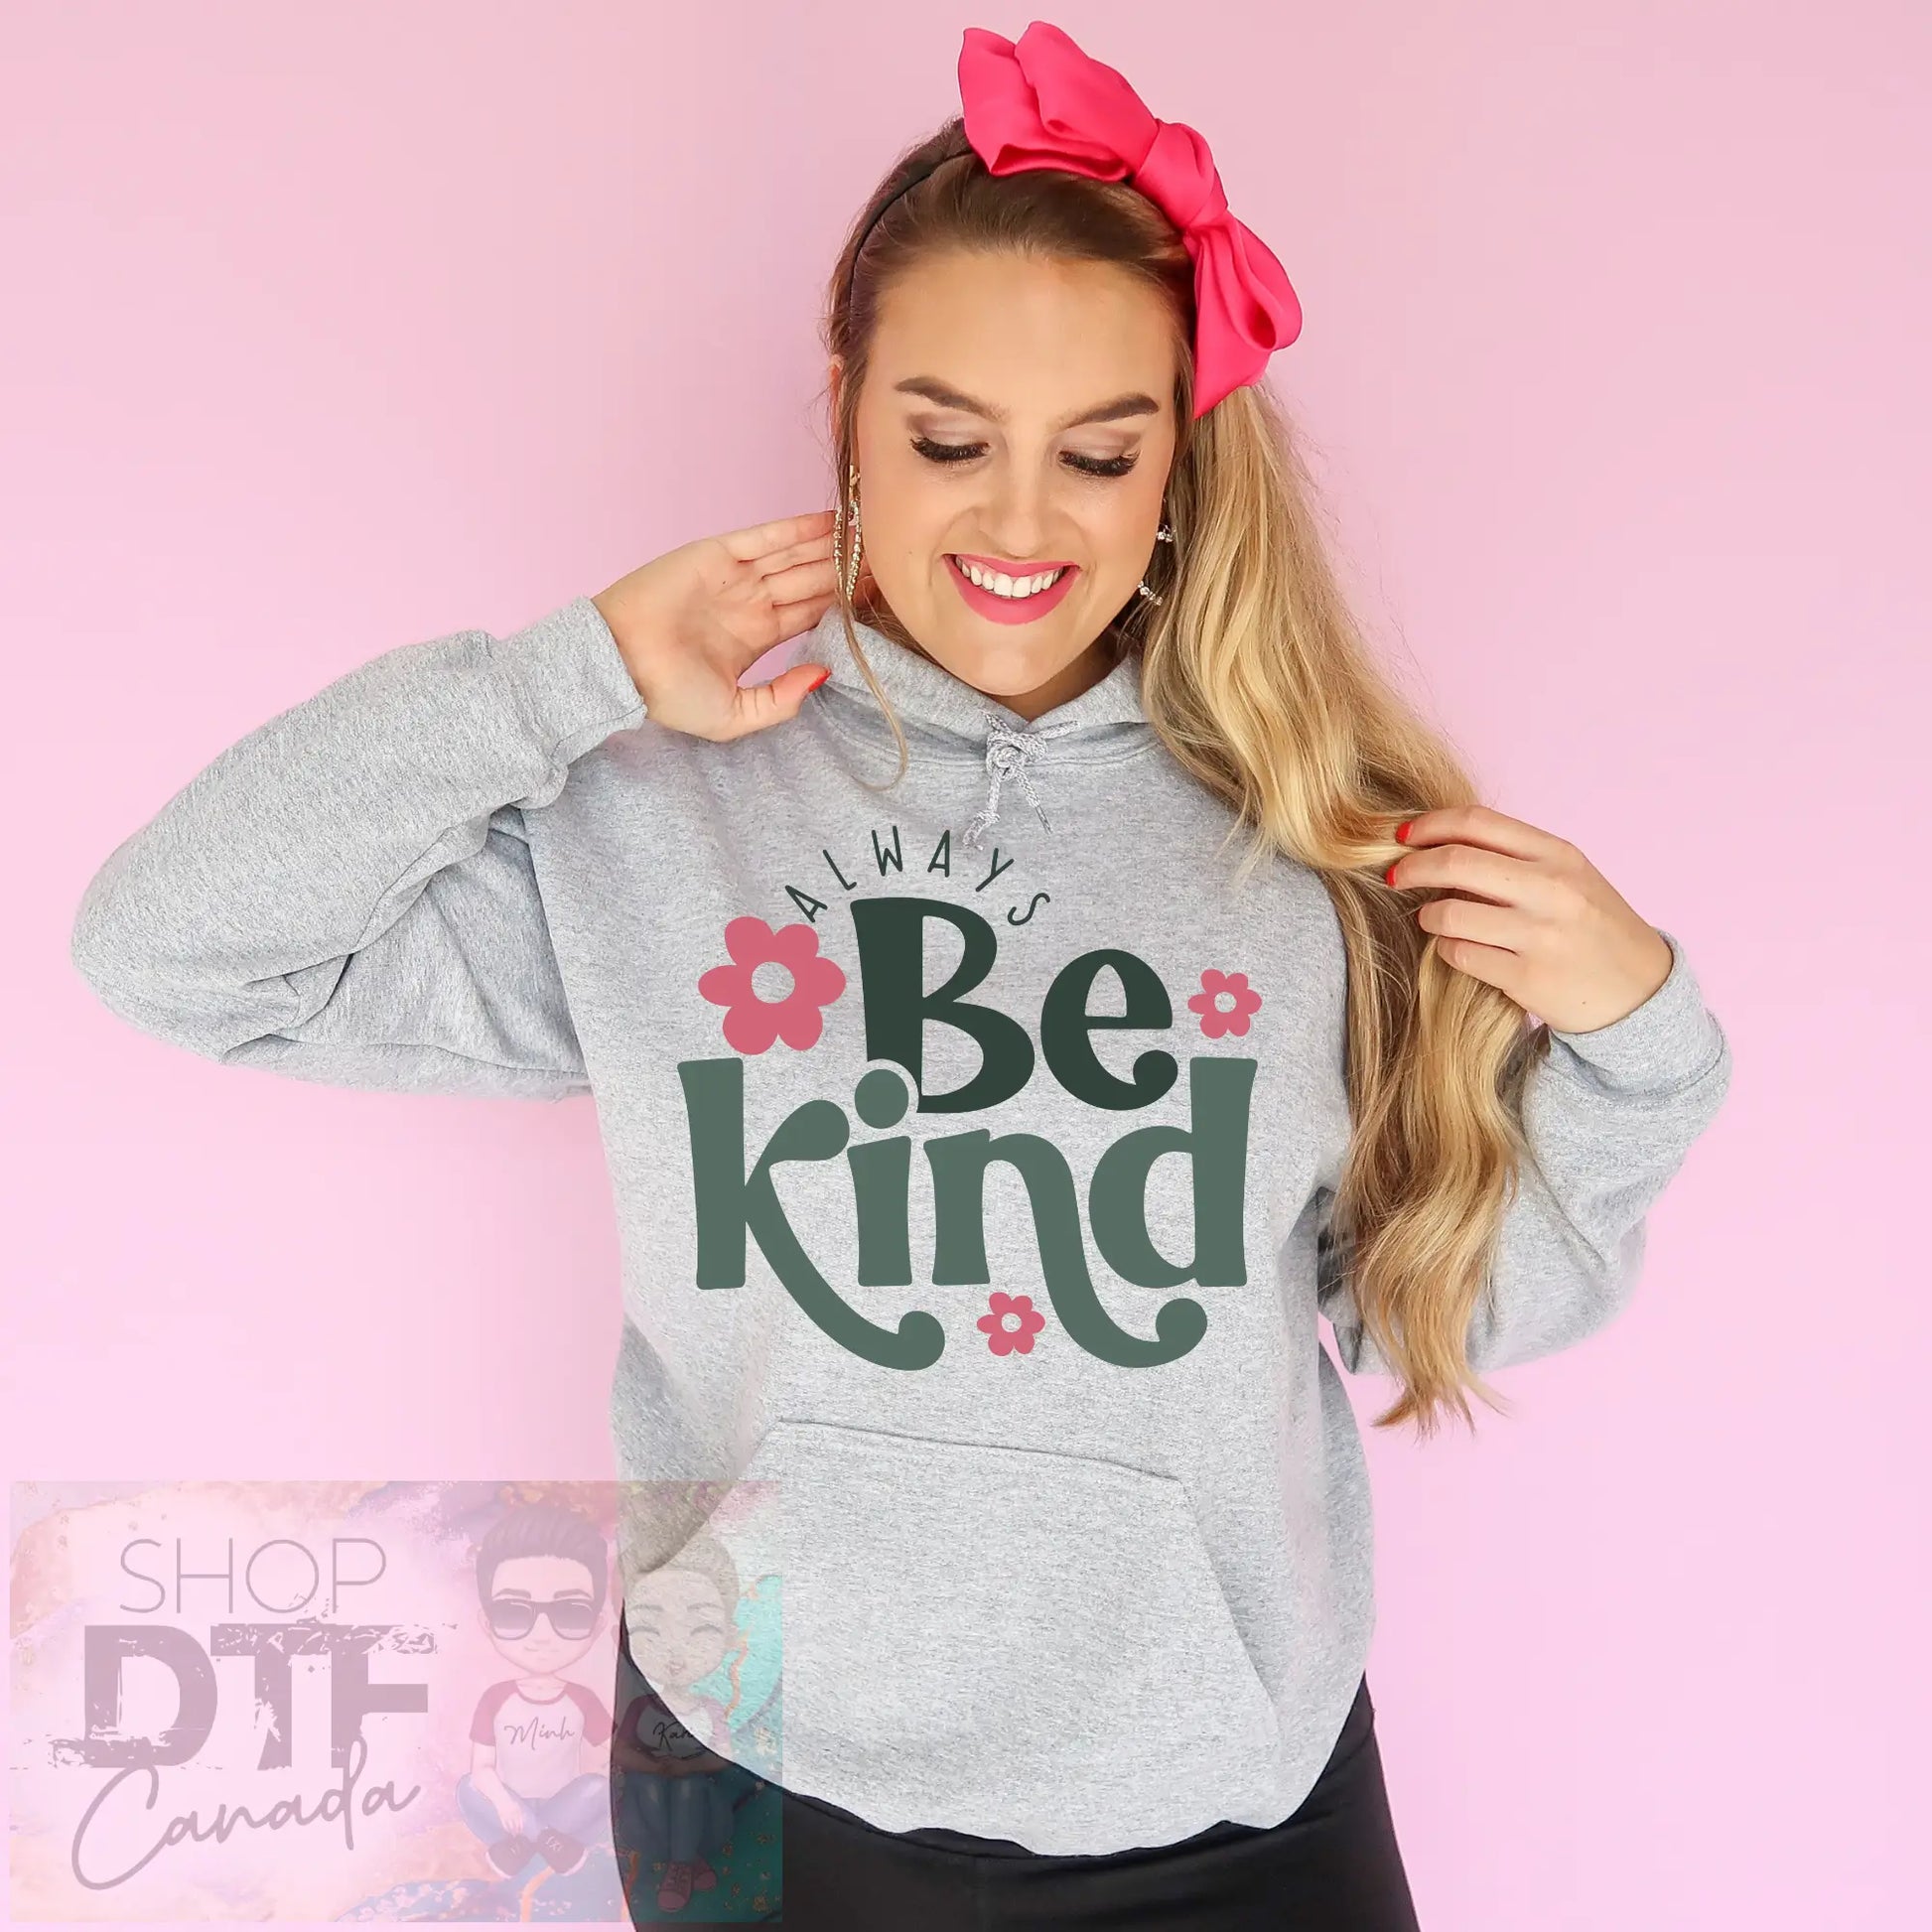 Anti-Bullying - Always be kind - Shirts & Tops